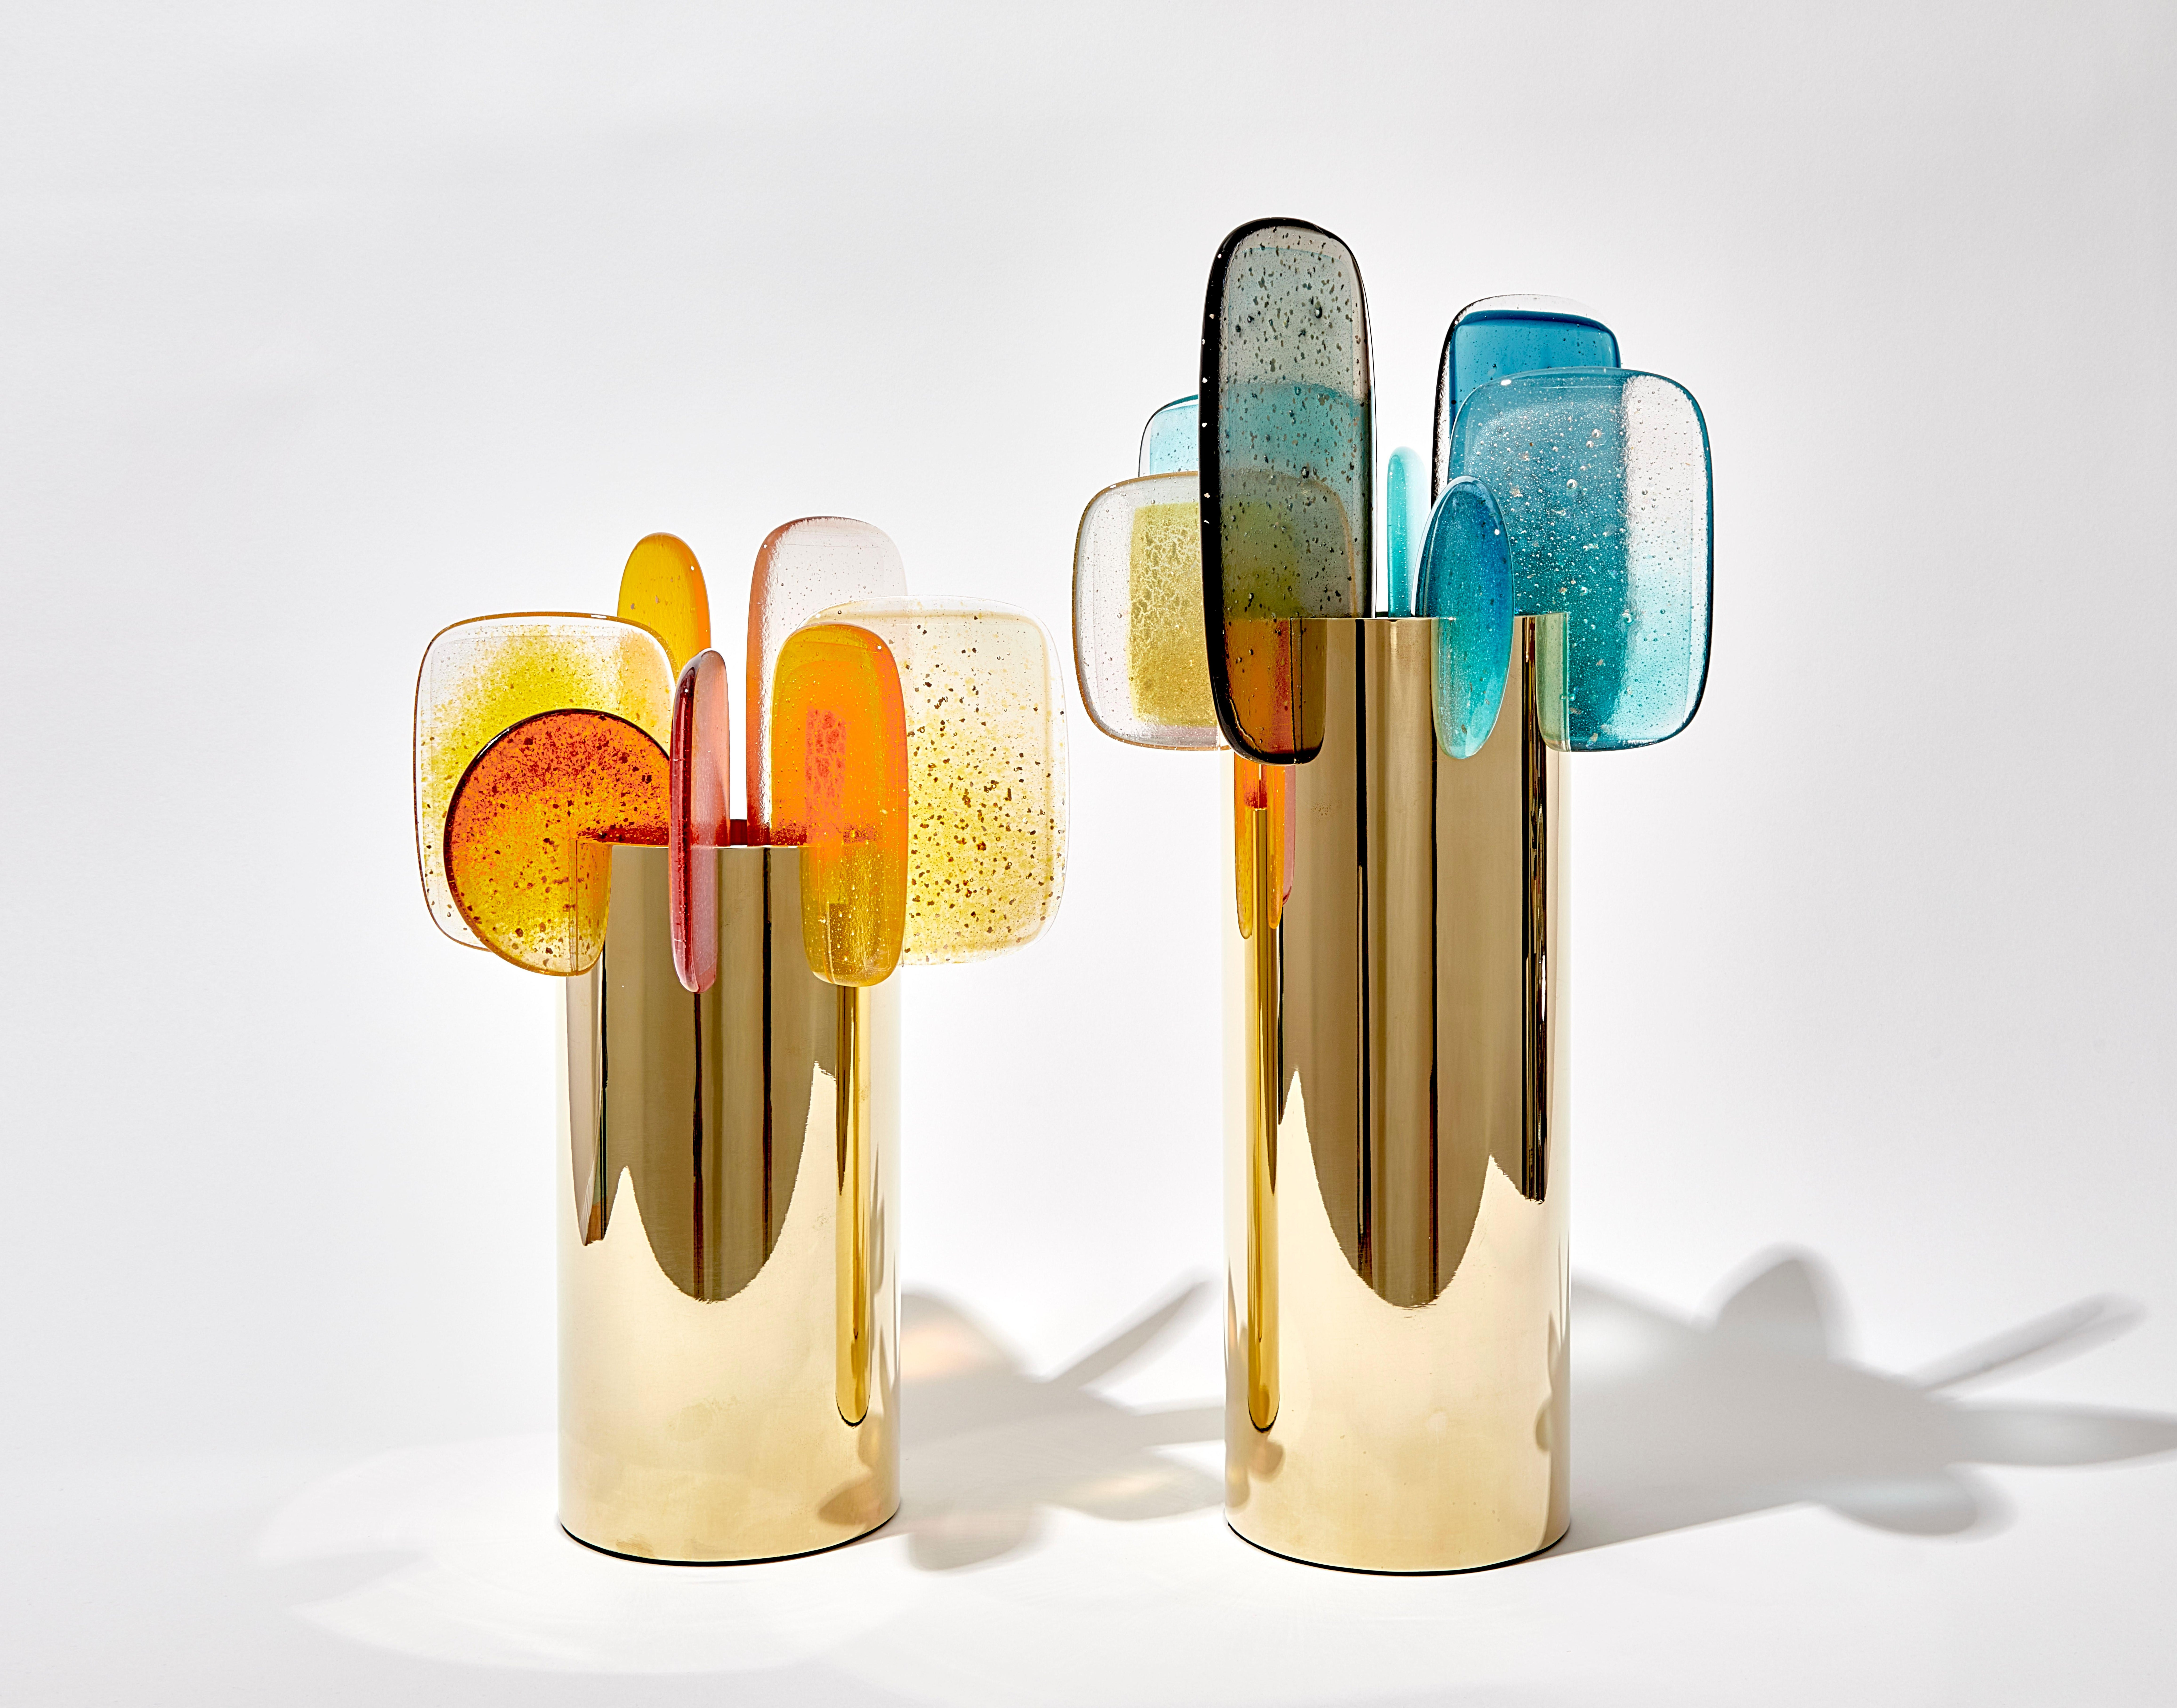 Paradise Aqua and Paradise Sunshine 

Each glass element is handcrafted using delicate kiln-firing techniques. Not two are the same making every Paradise sculpture completely one-off. Delicate glass powders and precious metals are sieved and blended